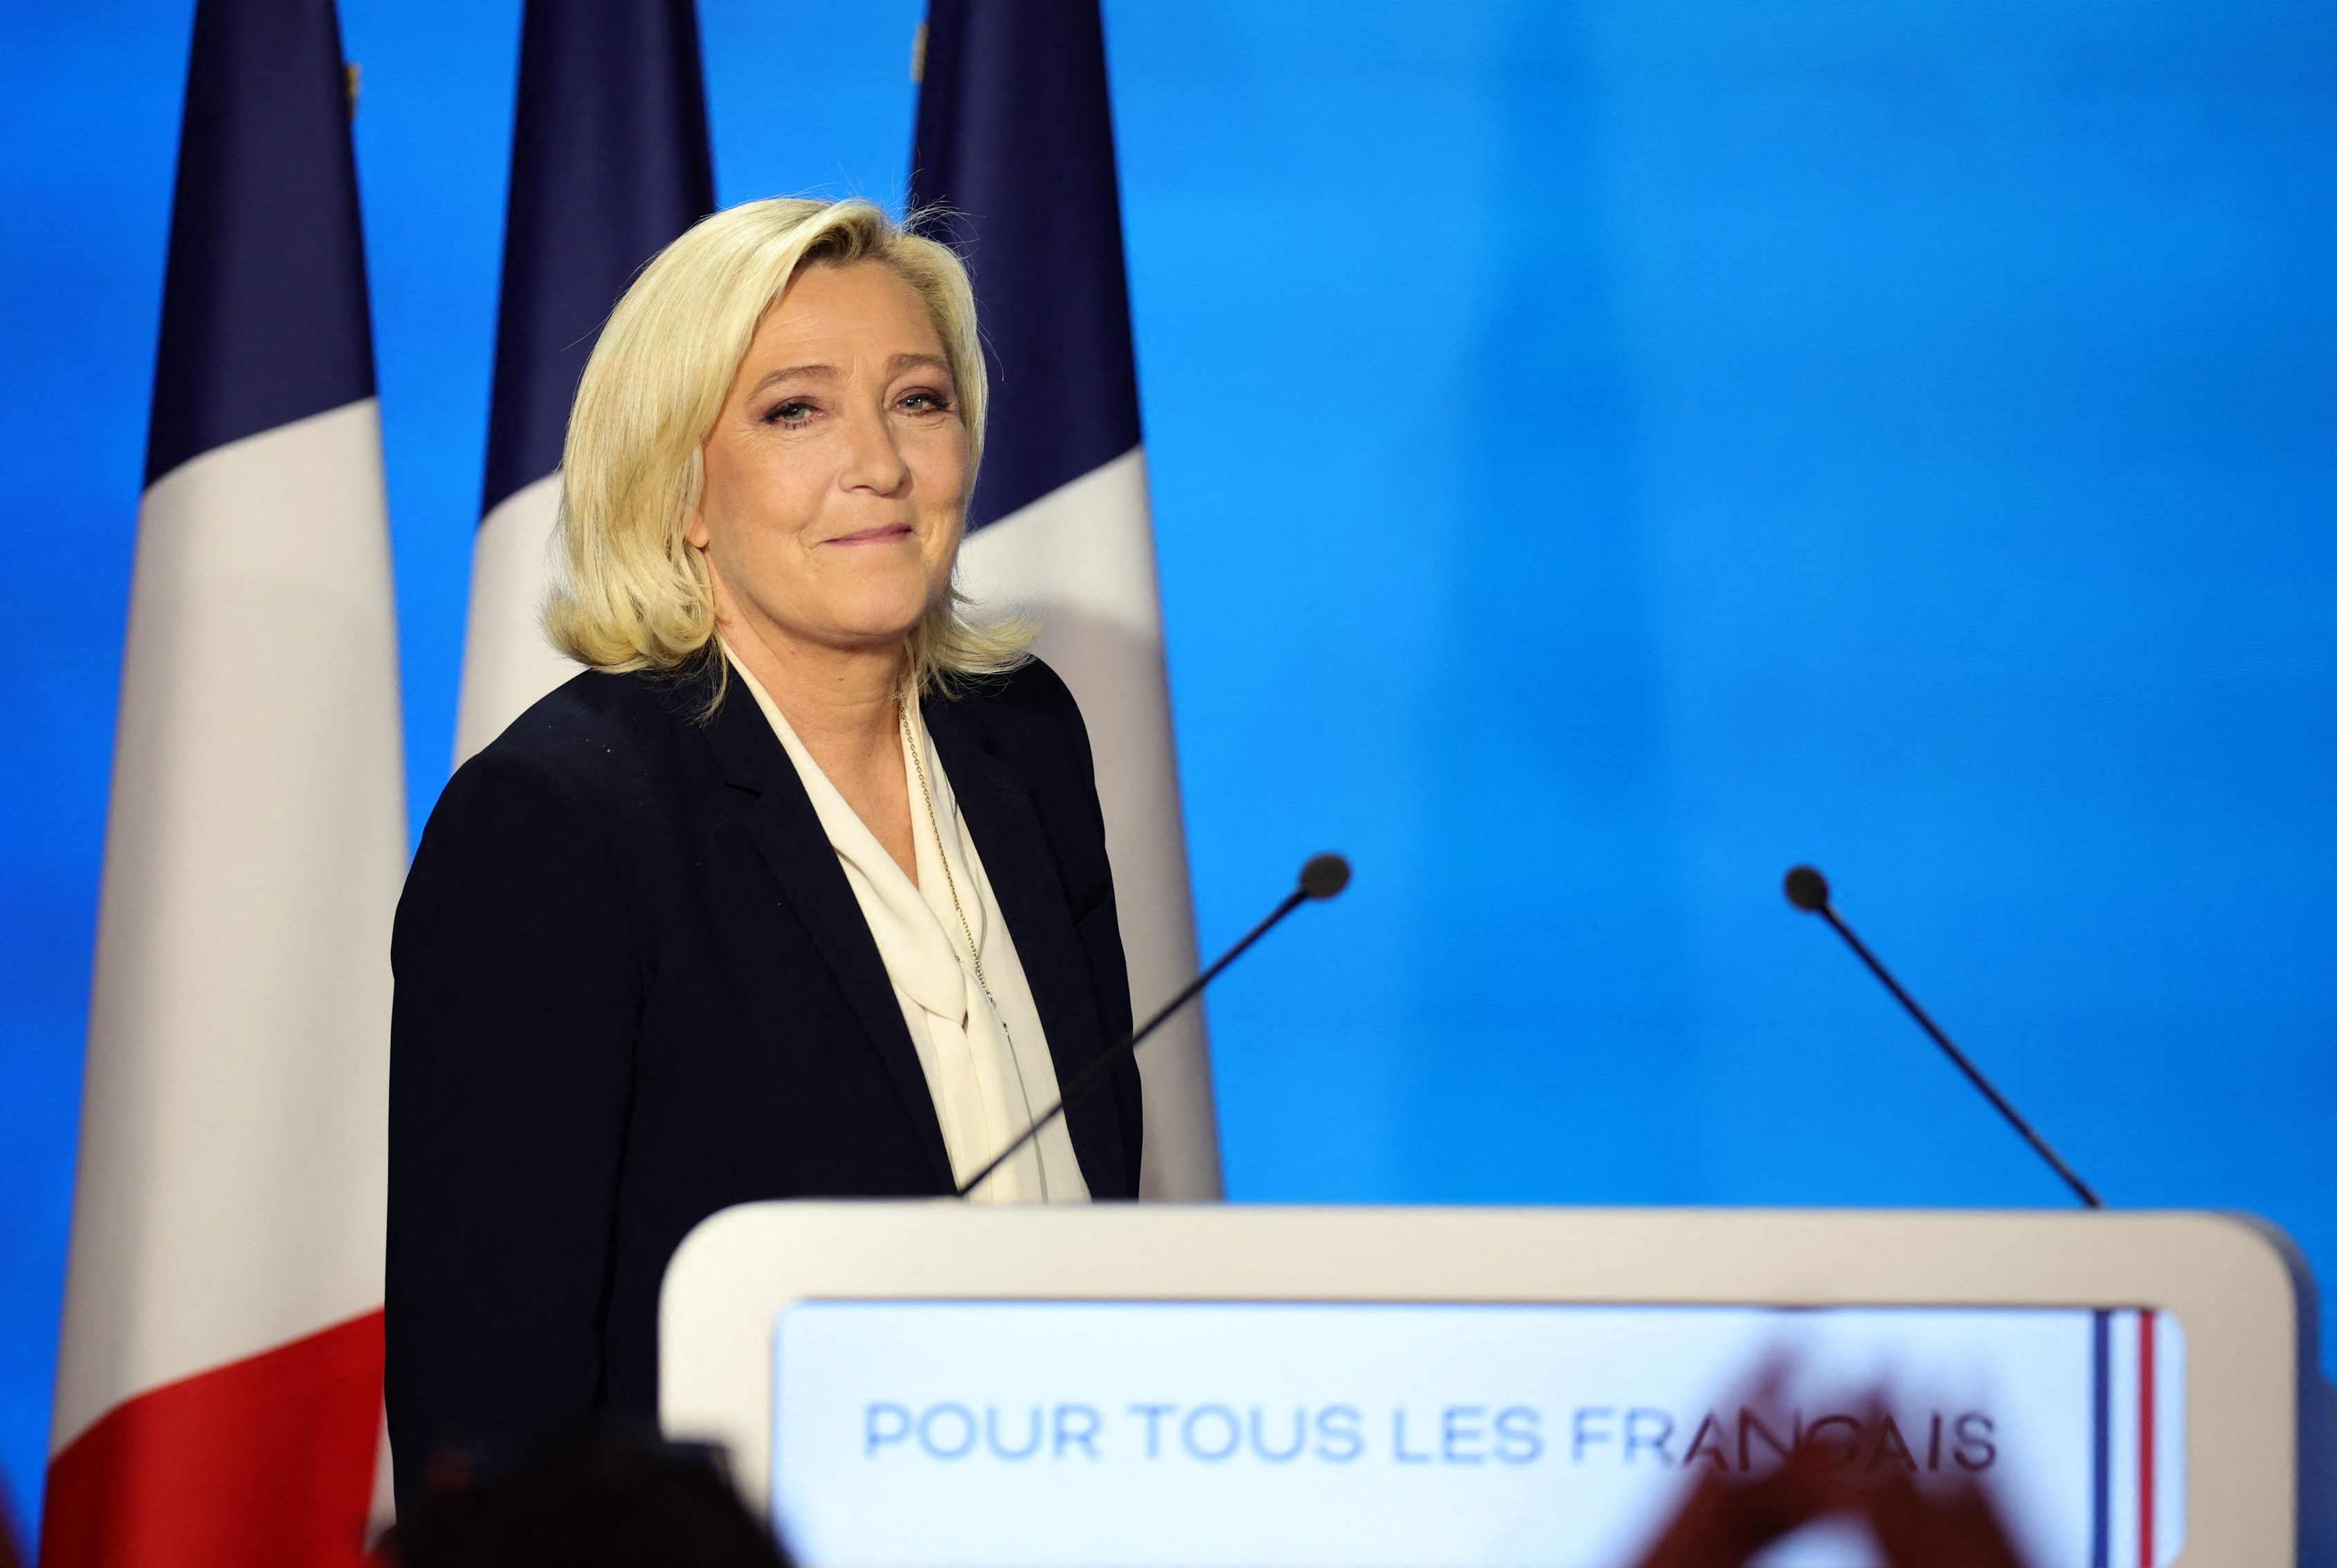 France Election 2022: How a President Le Pen Could Legally Advance Her  Far-Right Agenda